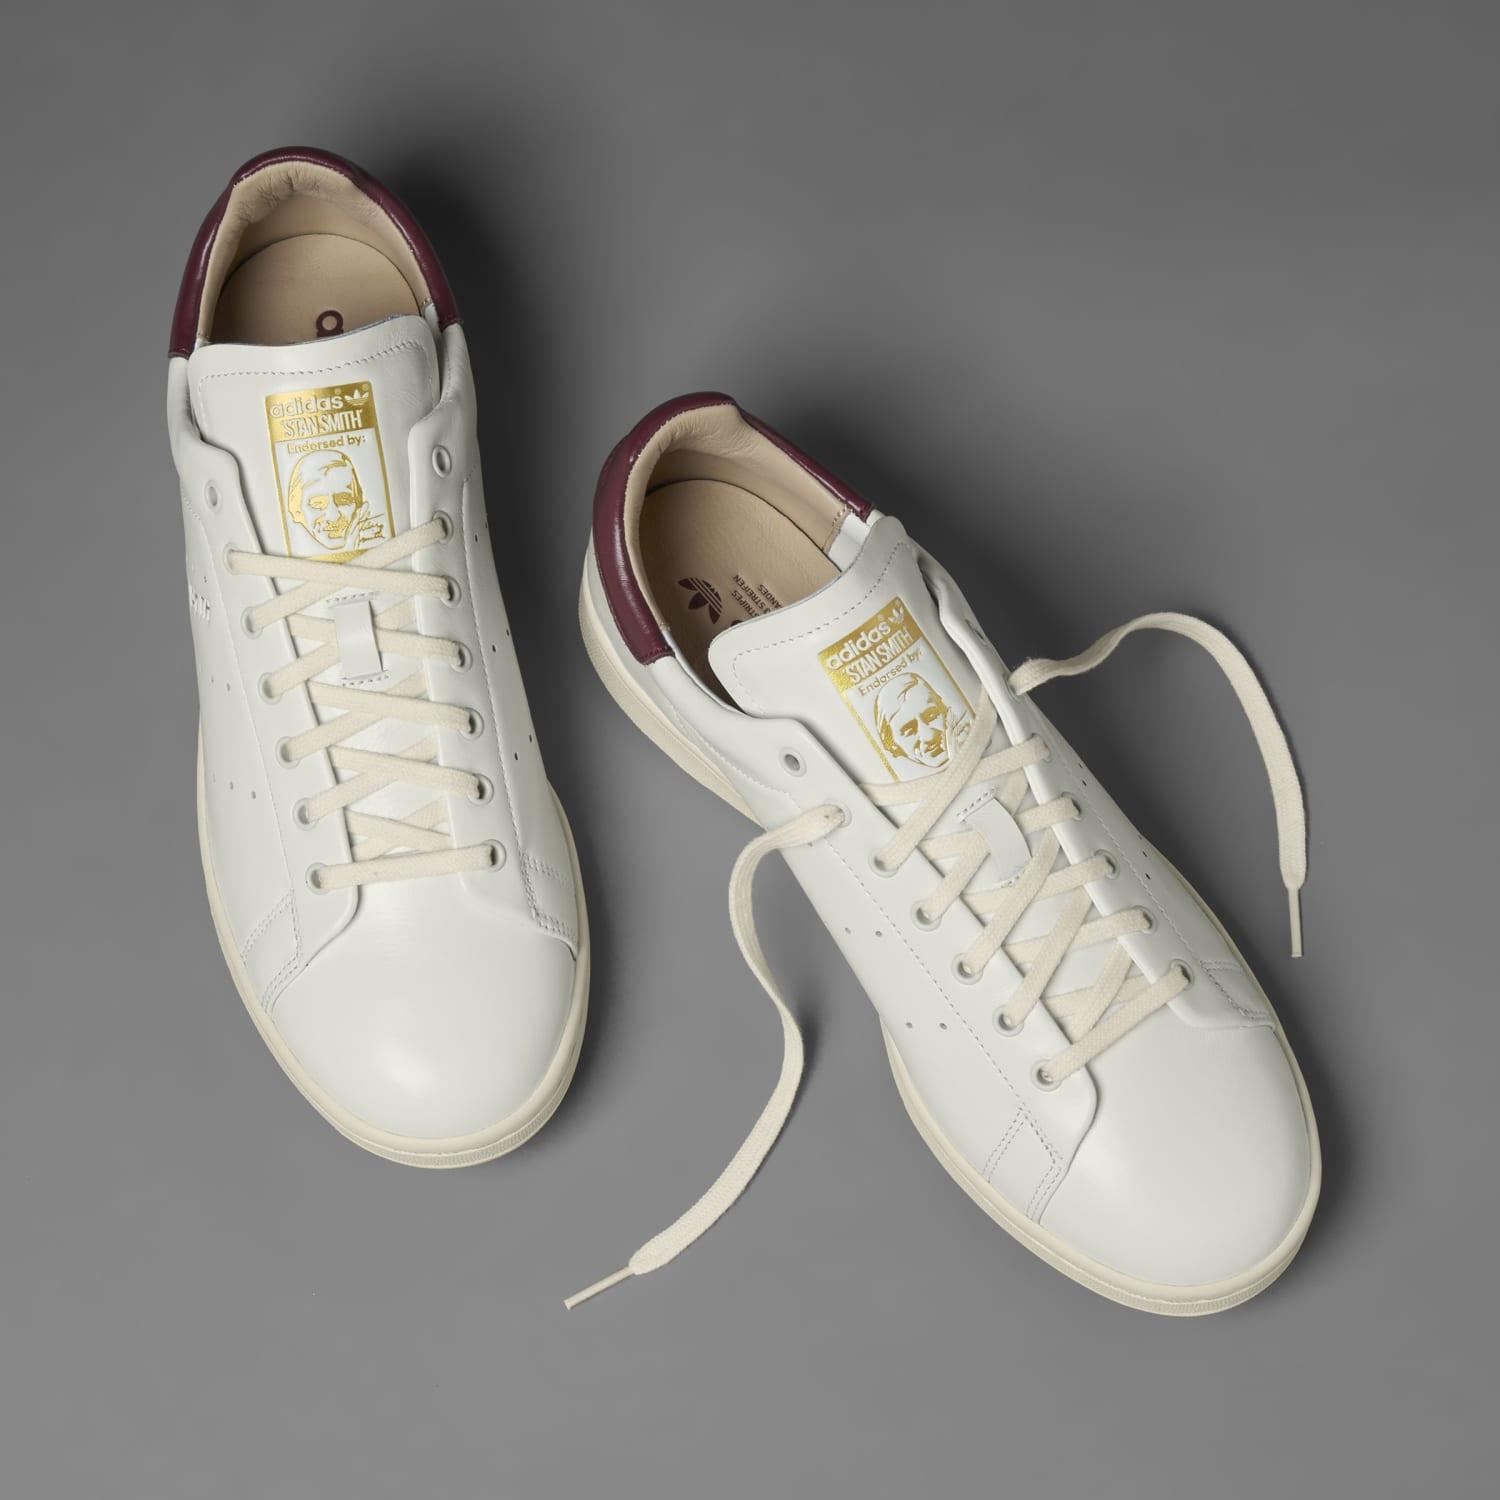 adidas Stan Smith Lux Shoes in Metallic | Lyst